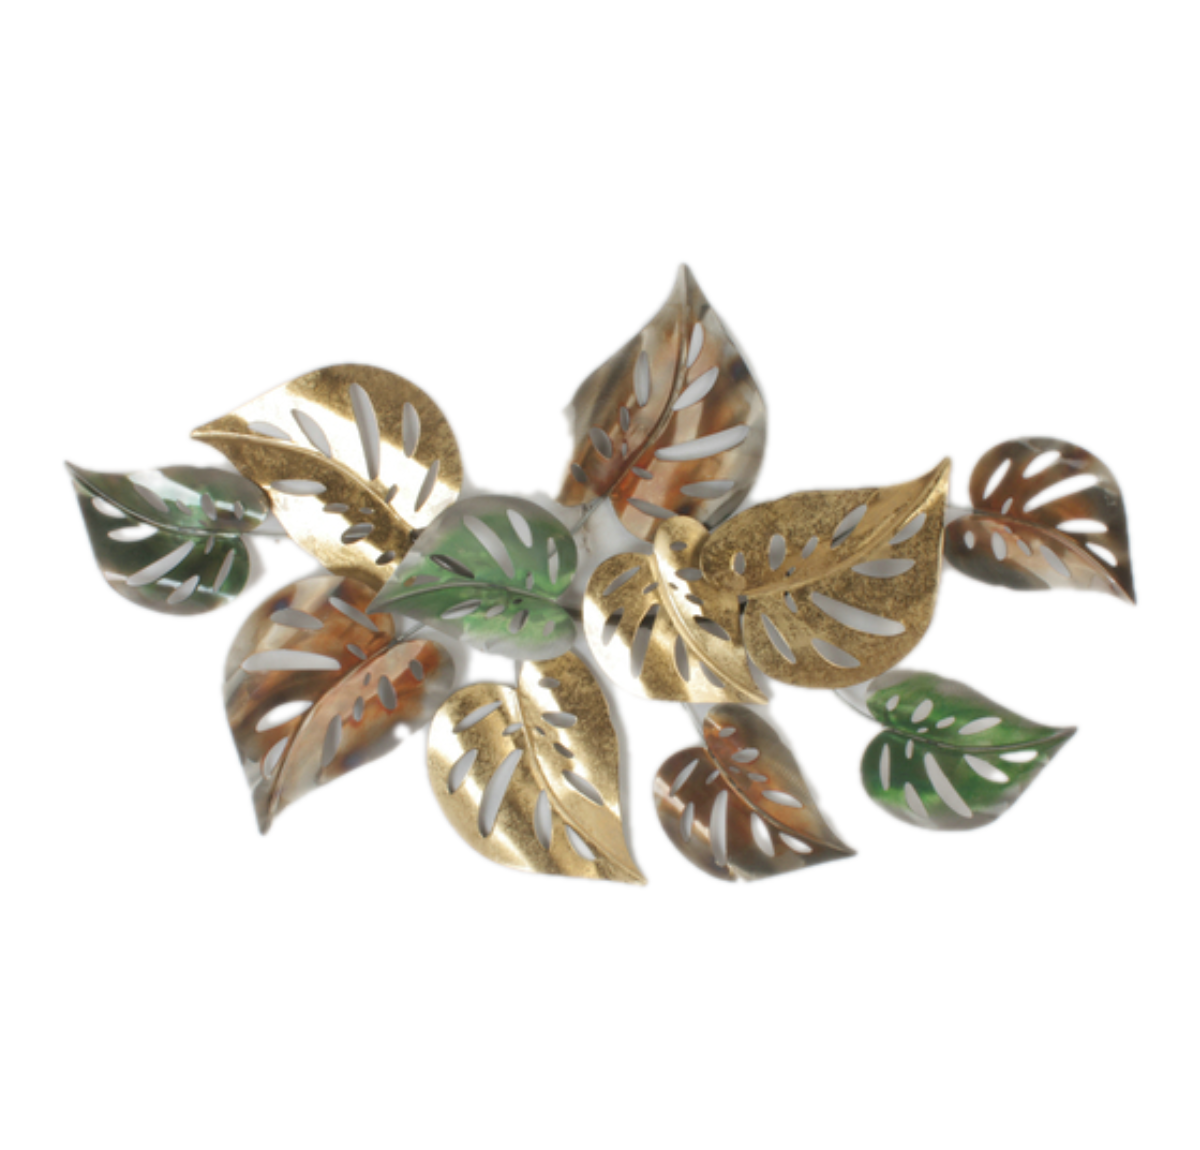 Coloured Autumn Leaves Metal Art Wall Hanging